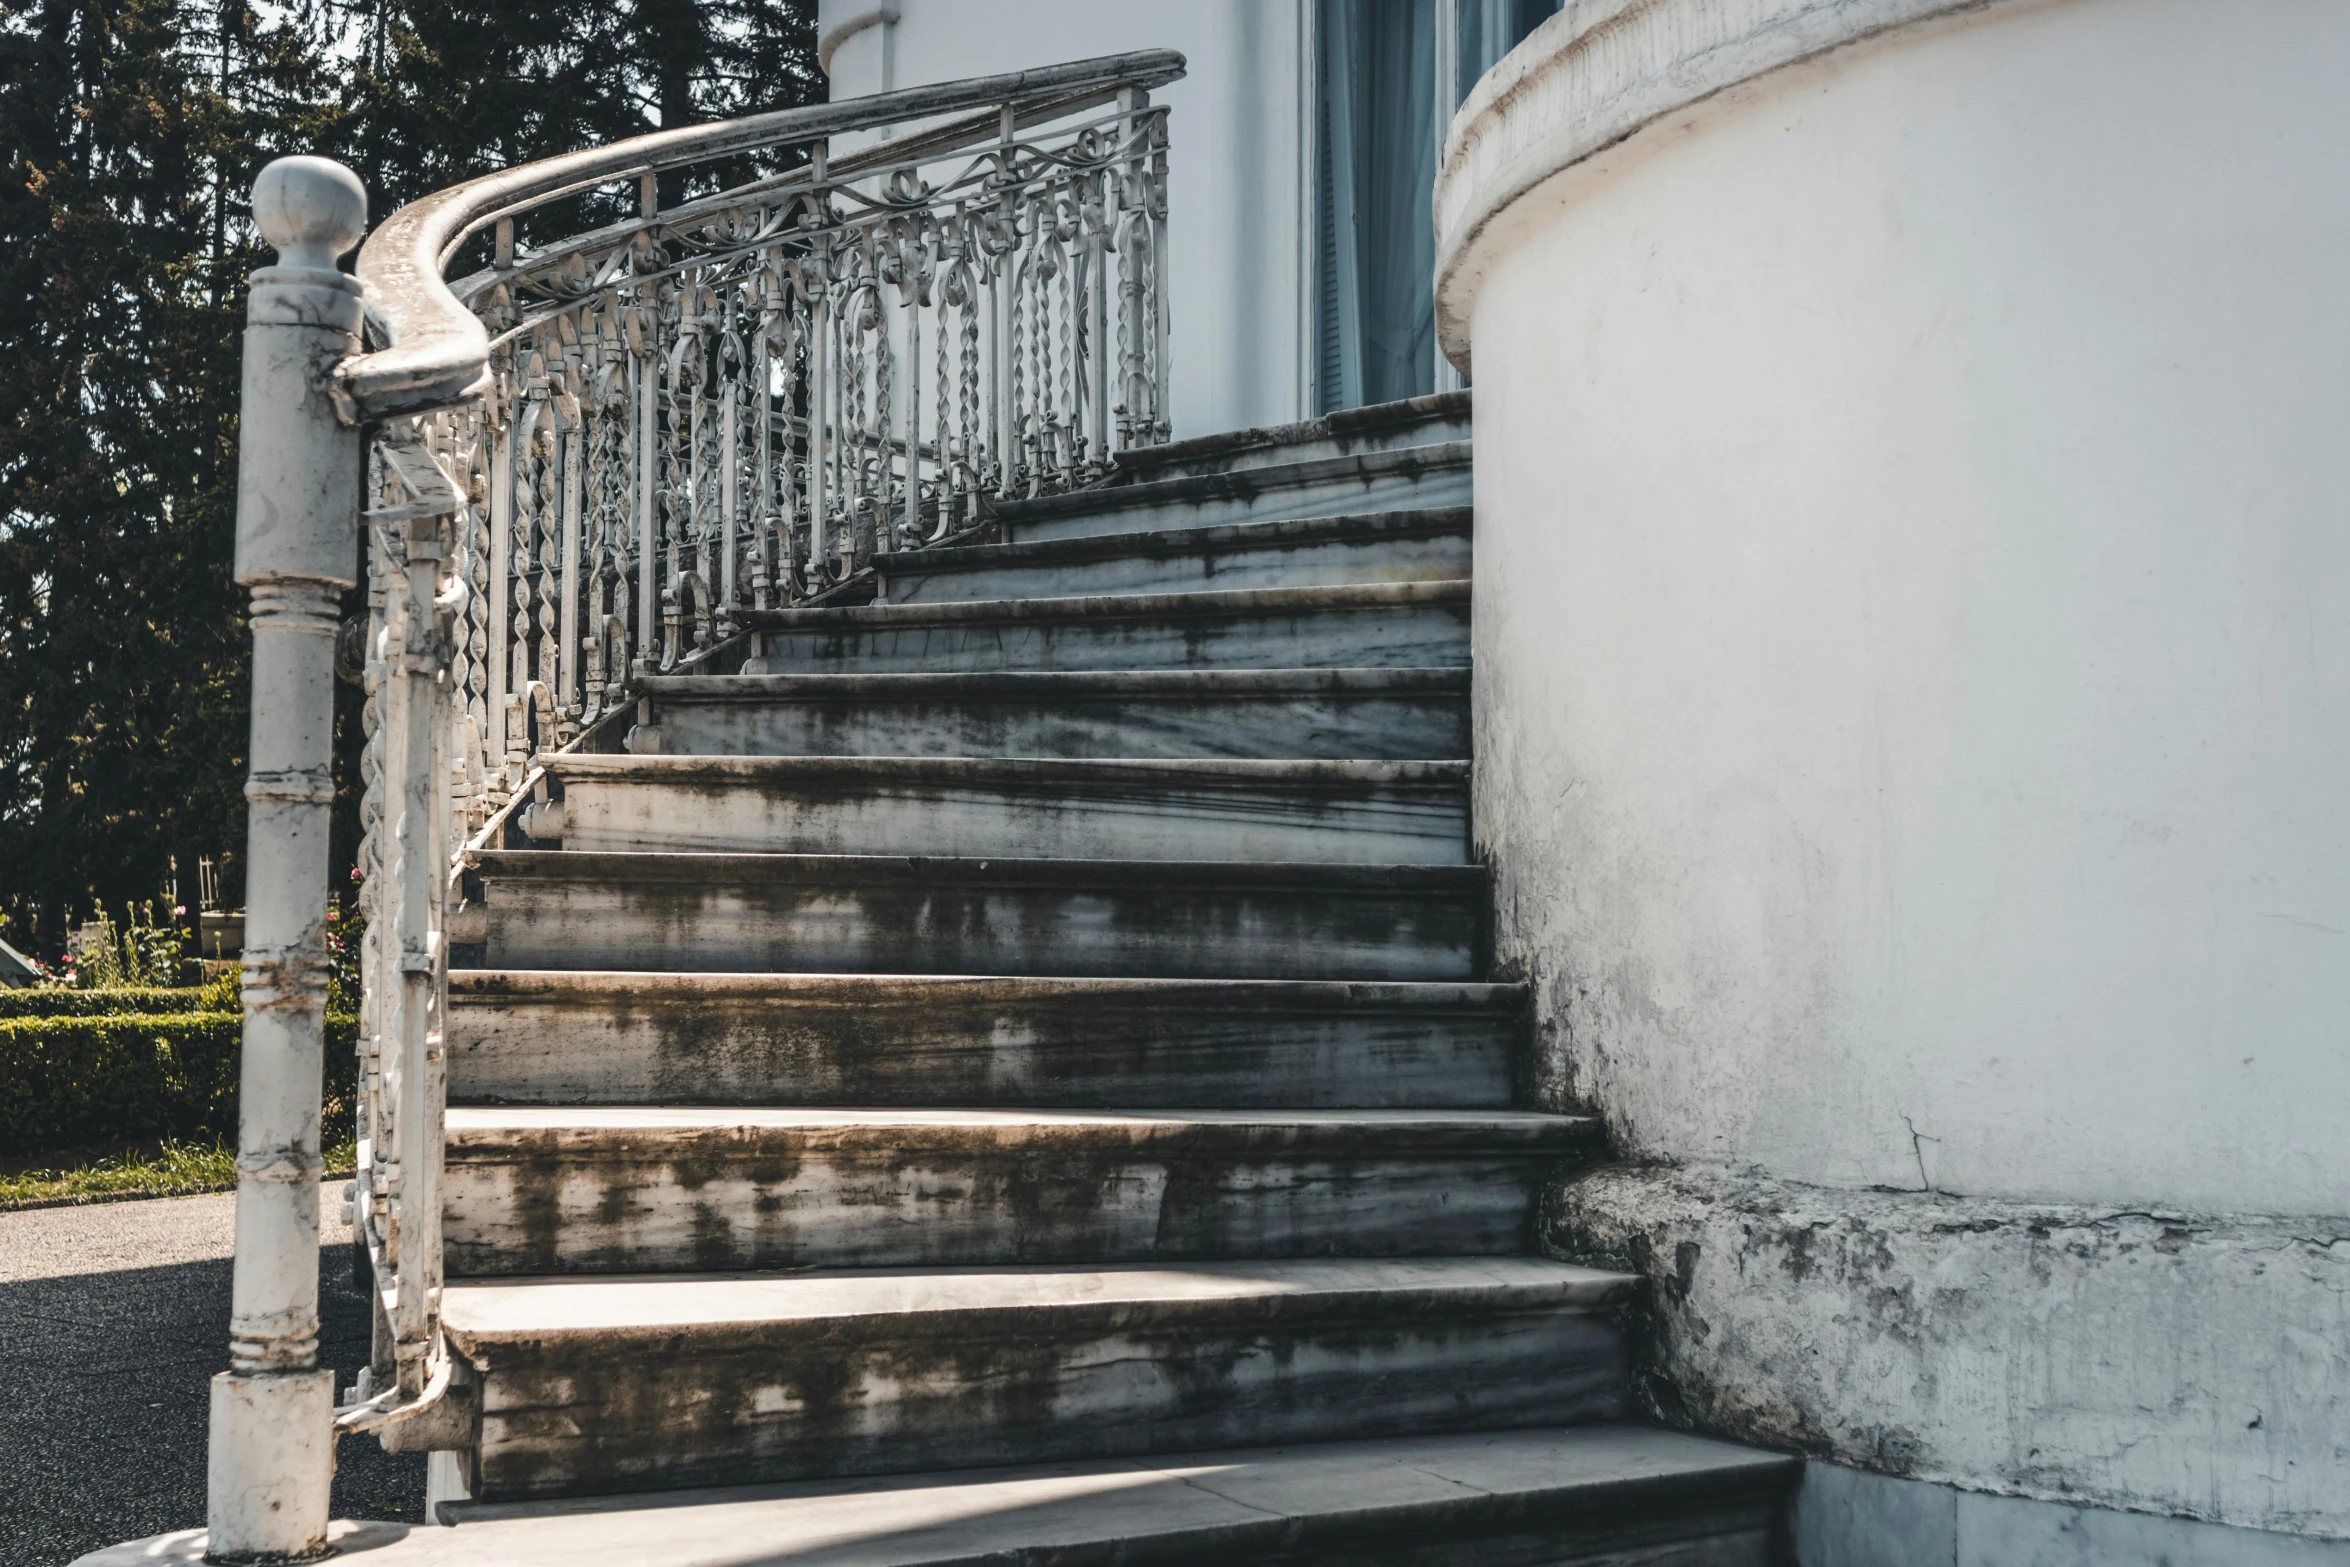 a person riding a skateboard down a set of stairs, pexels contest winner, neoclassicism, silver，ivory, stone stairway, deteriorated, curvy build